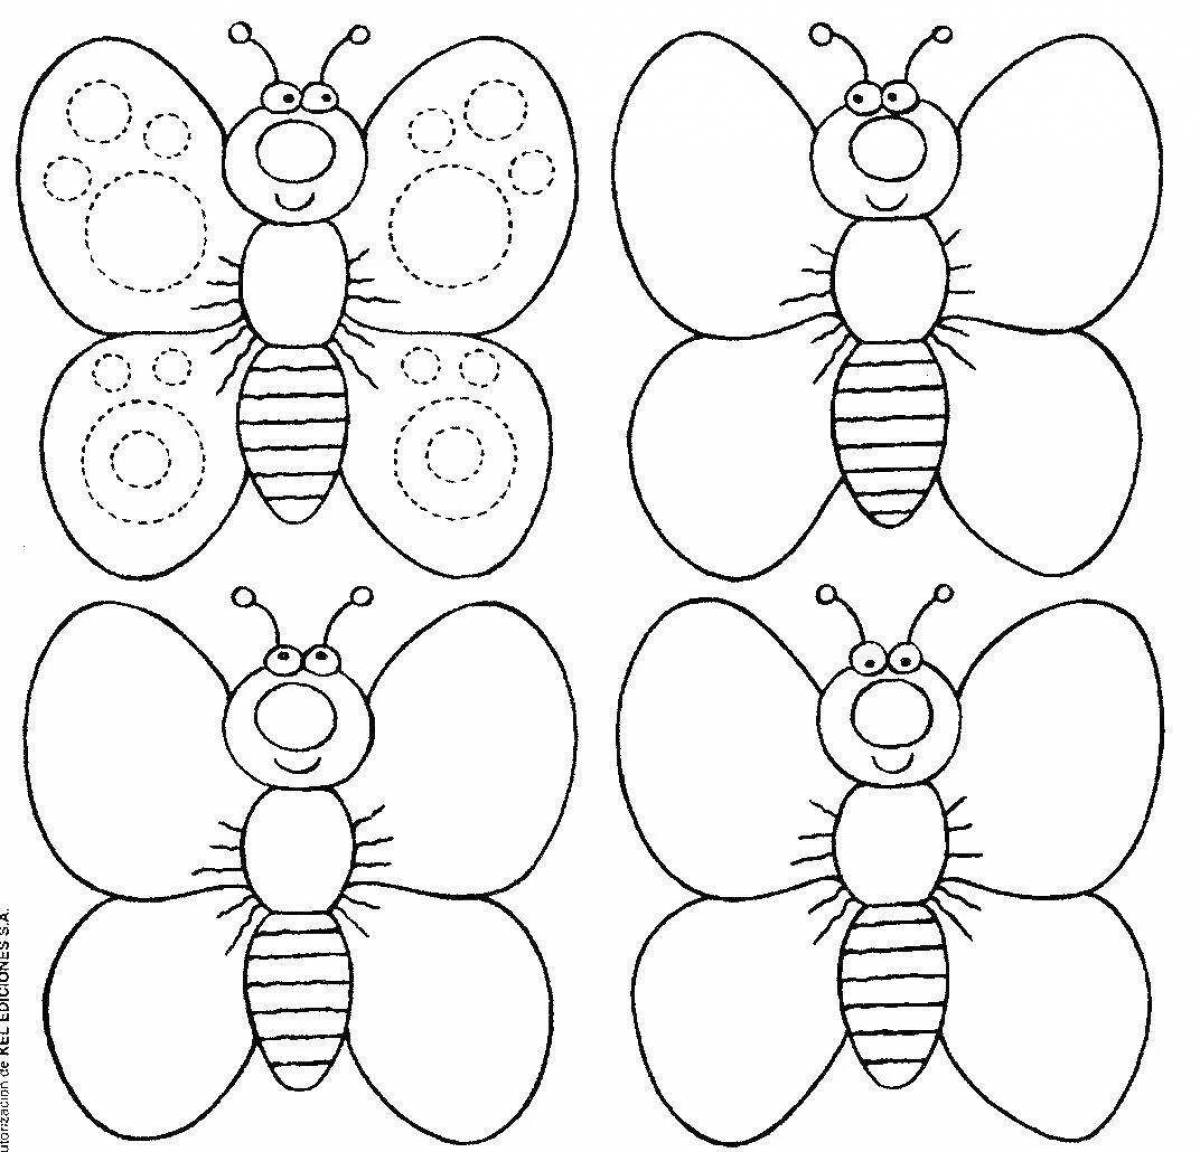 Amazing insect class coloring book